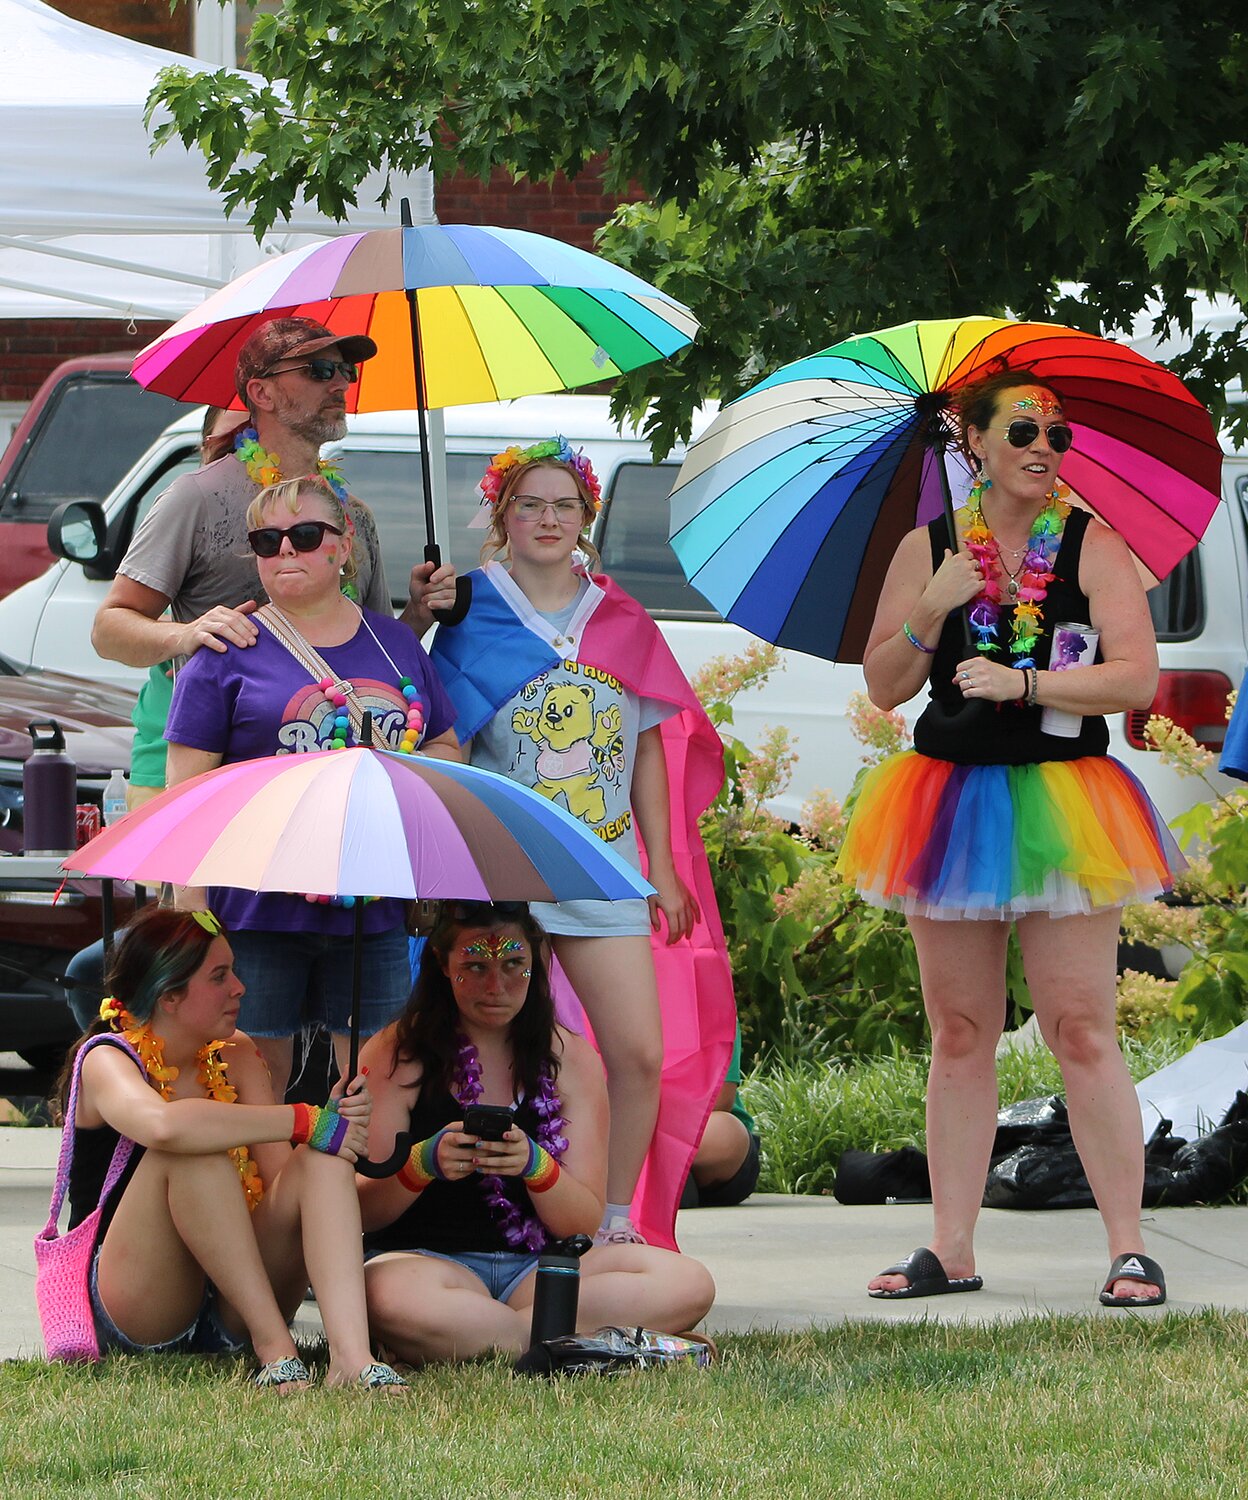 Many people braved the hot weather Saturday to attend the first-ever Pride Festival at Pike Place. The event was sponsored by the Crawfordsville Pride organization and included several craft and food vendors, lawn games and musical entertainment.